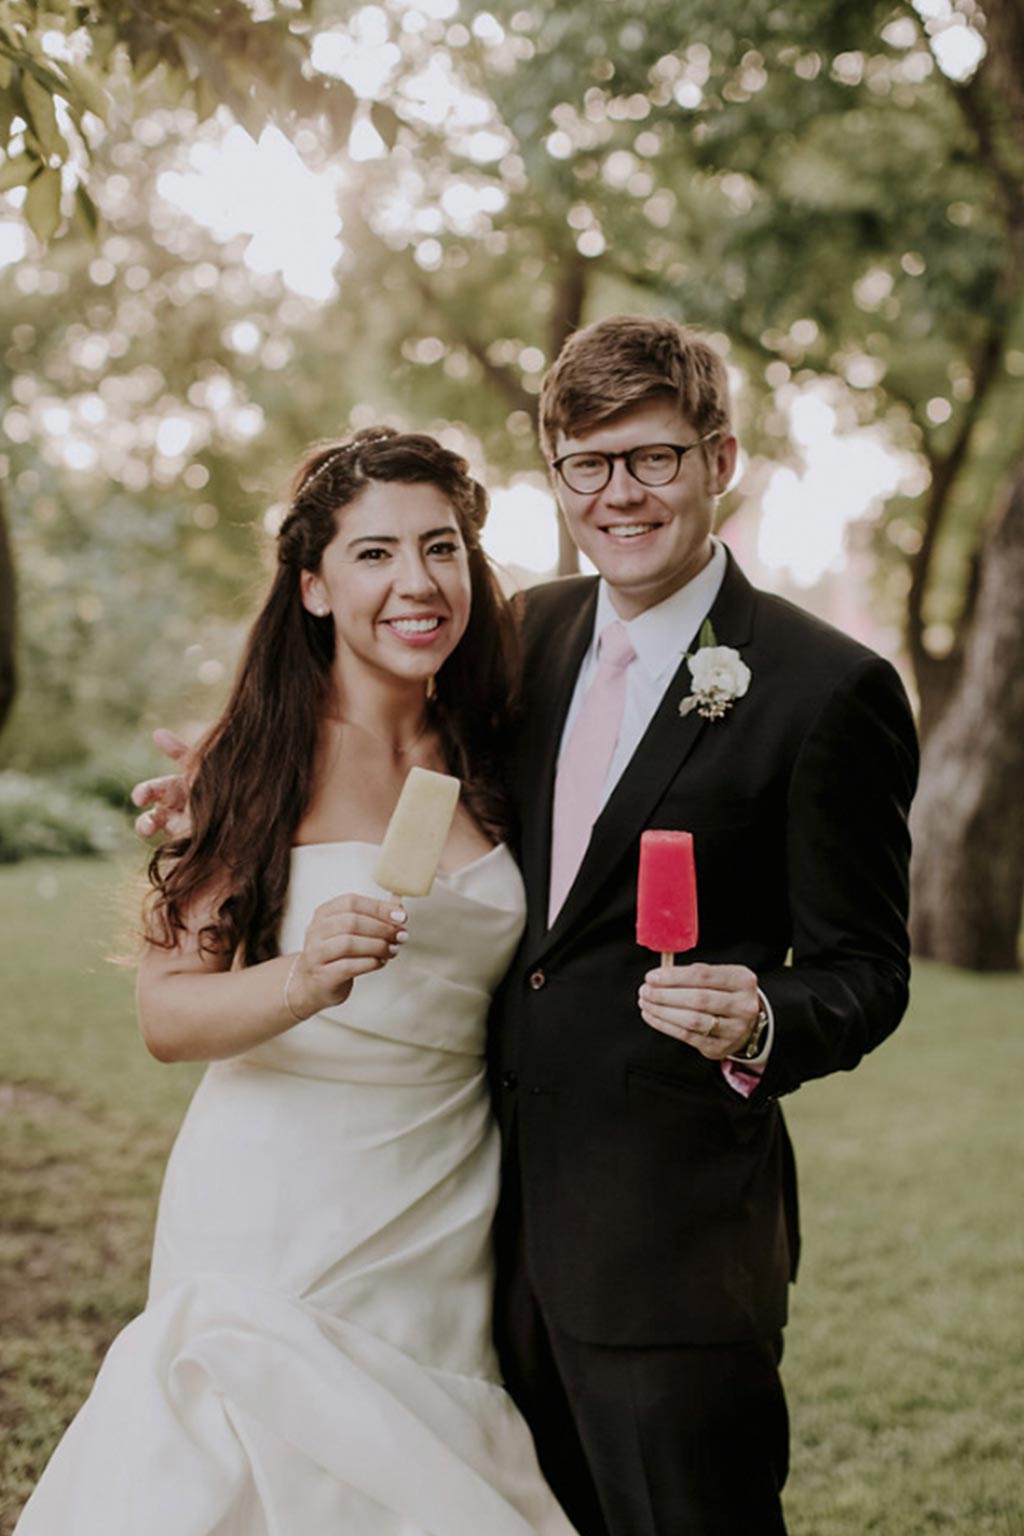 Bride and groom wedding portrait with Steel City Pops popsicles